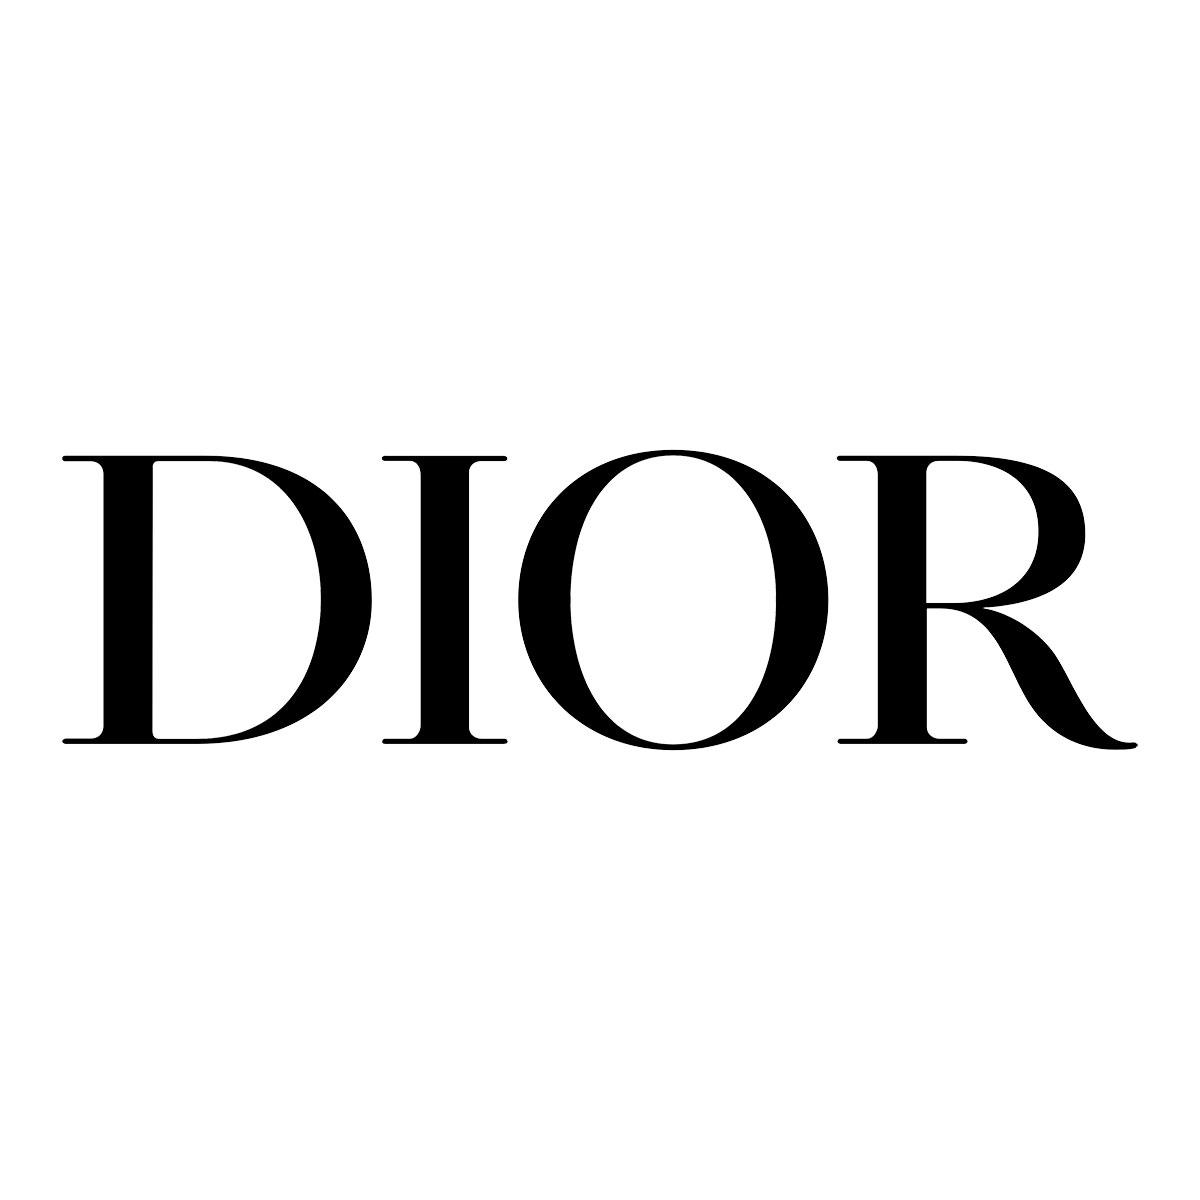 DIOR Coupons & Promo Codes